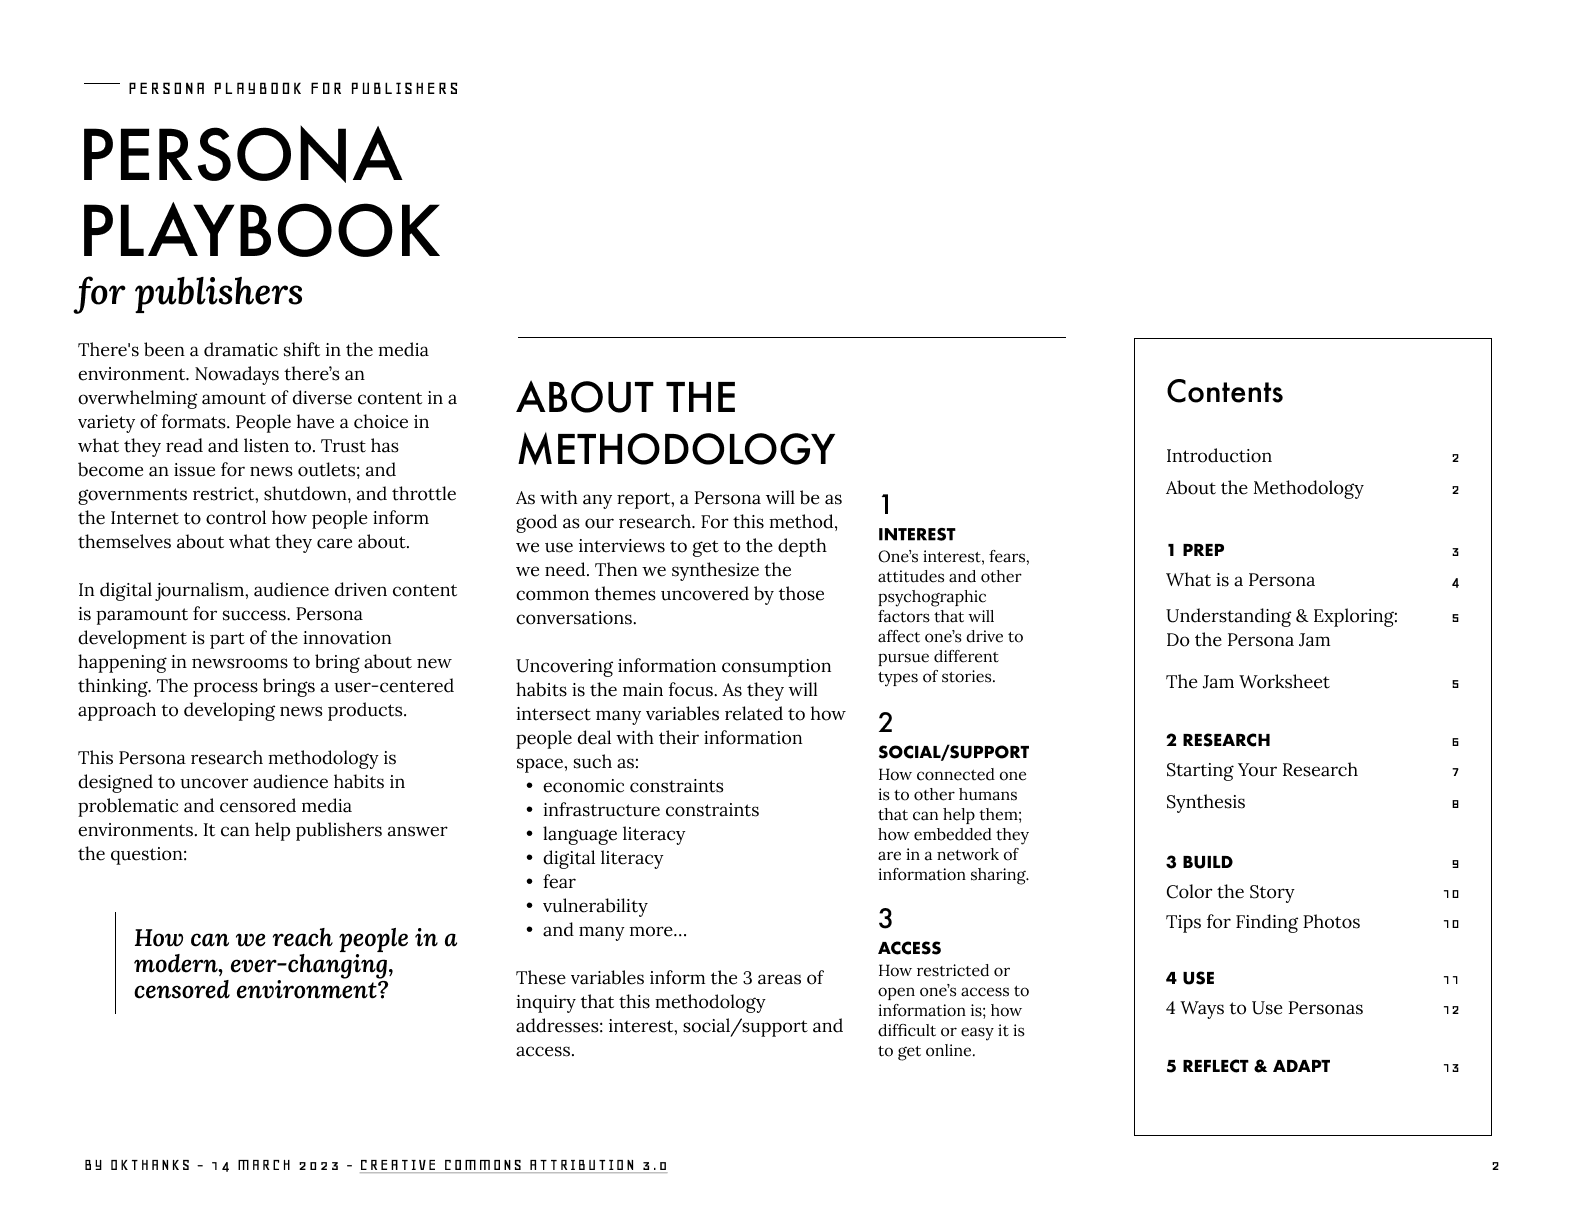 01-persona-playbook-publishers.png